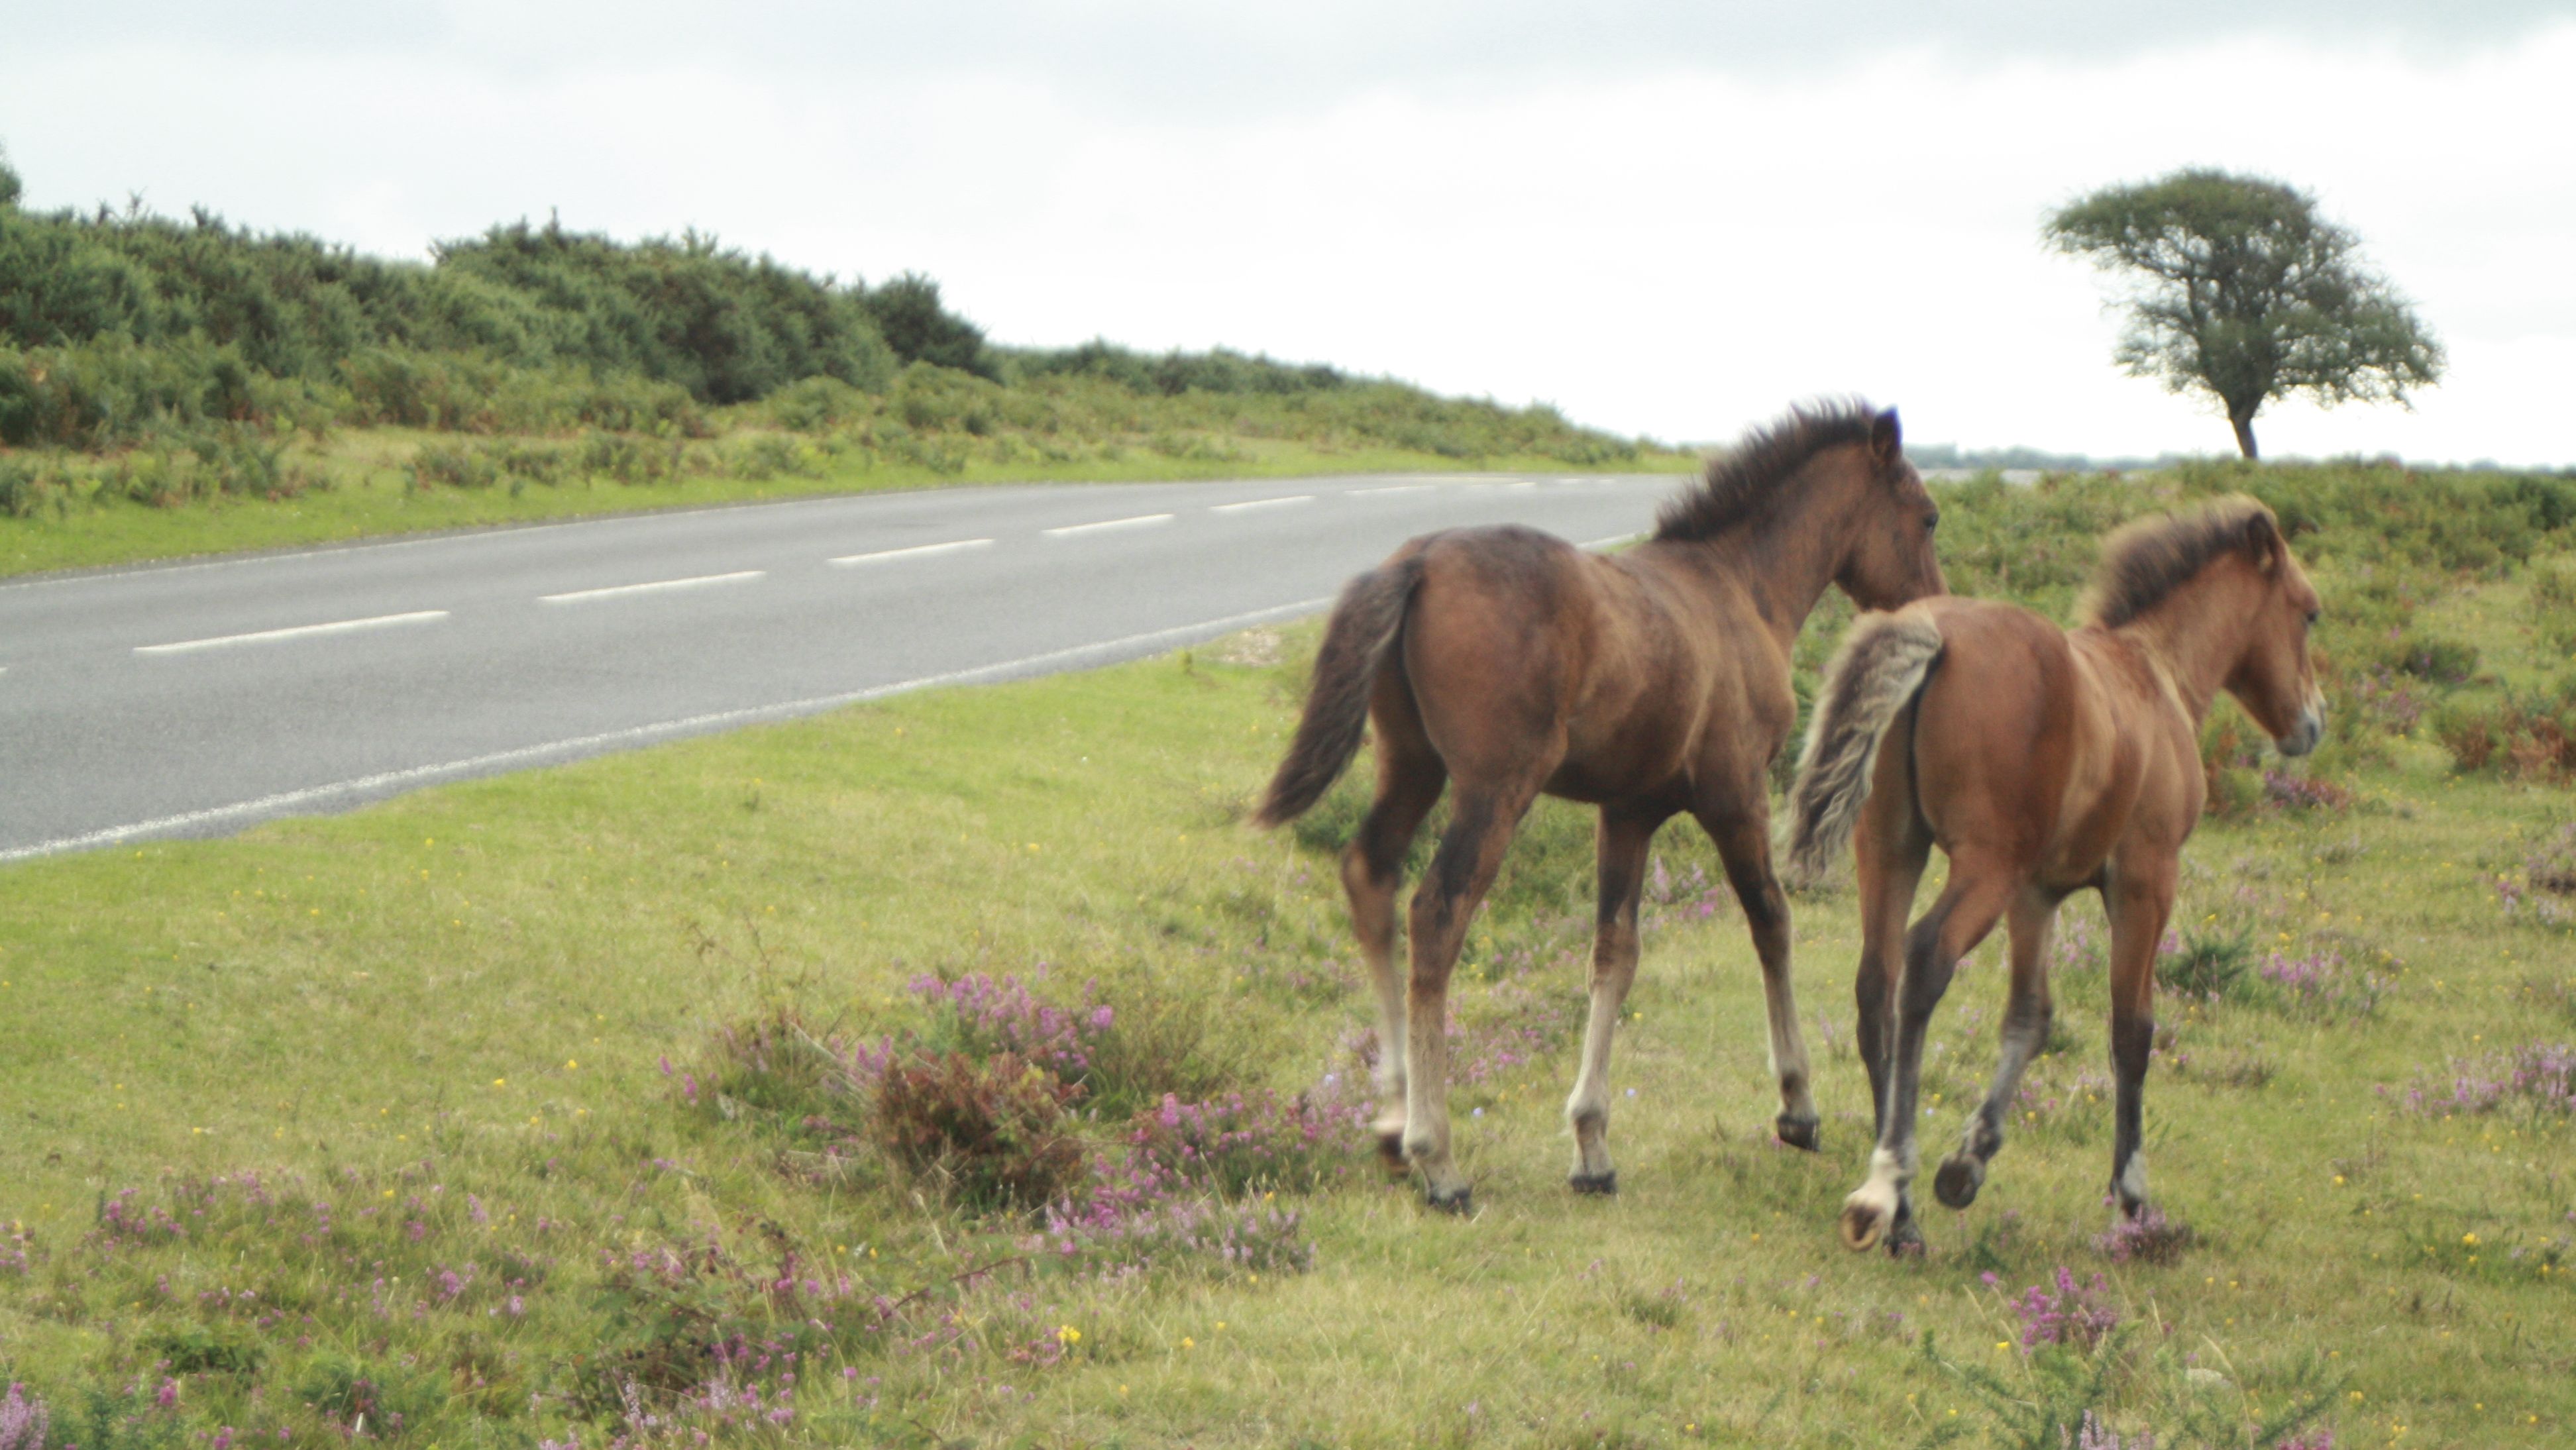 44 animals died on New Forest roads last year